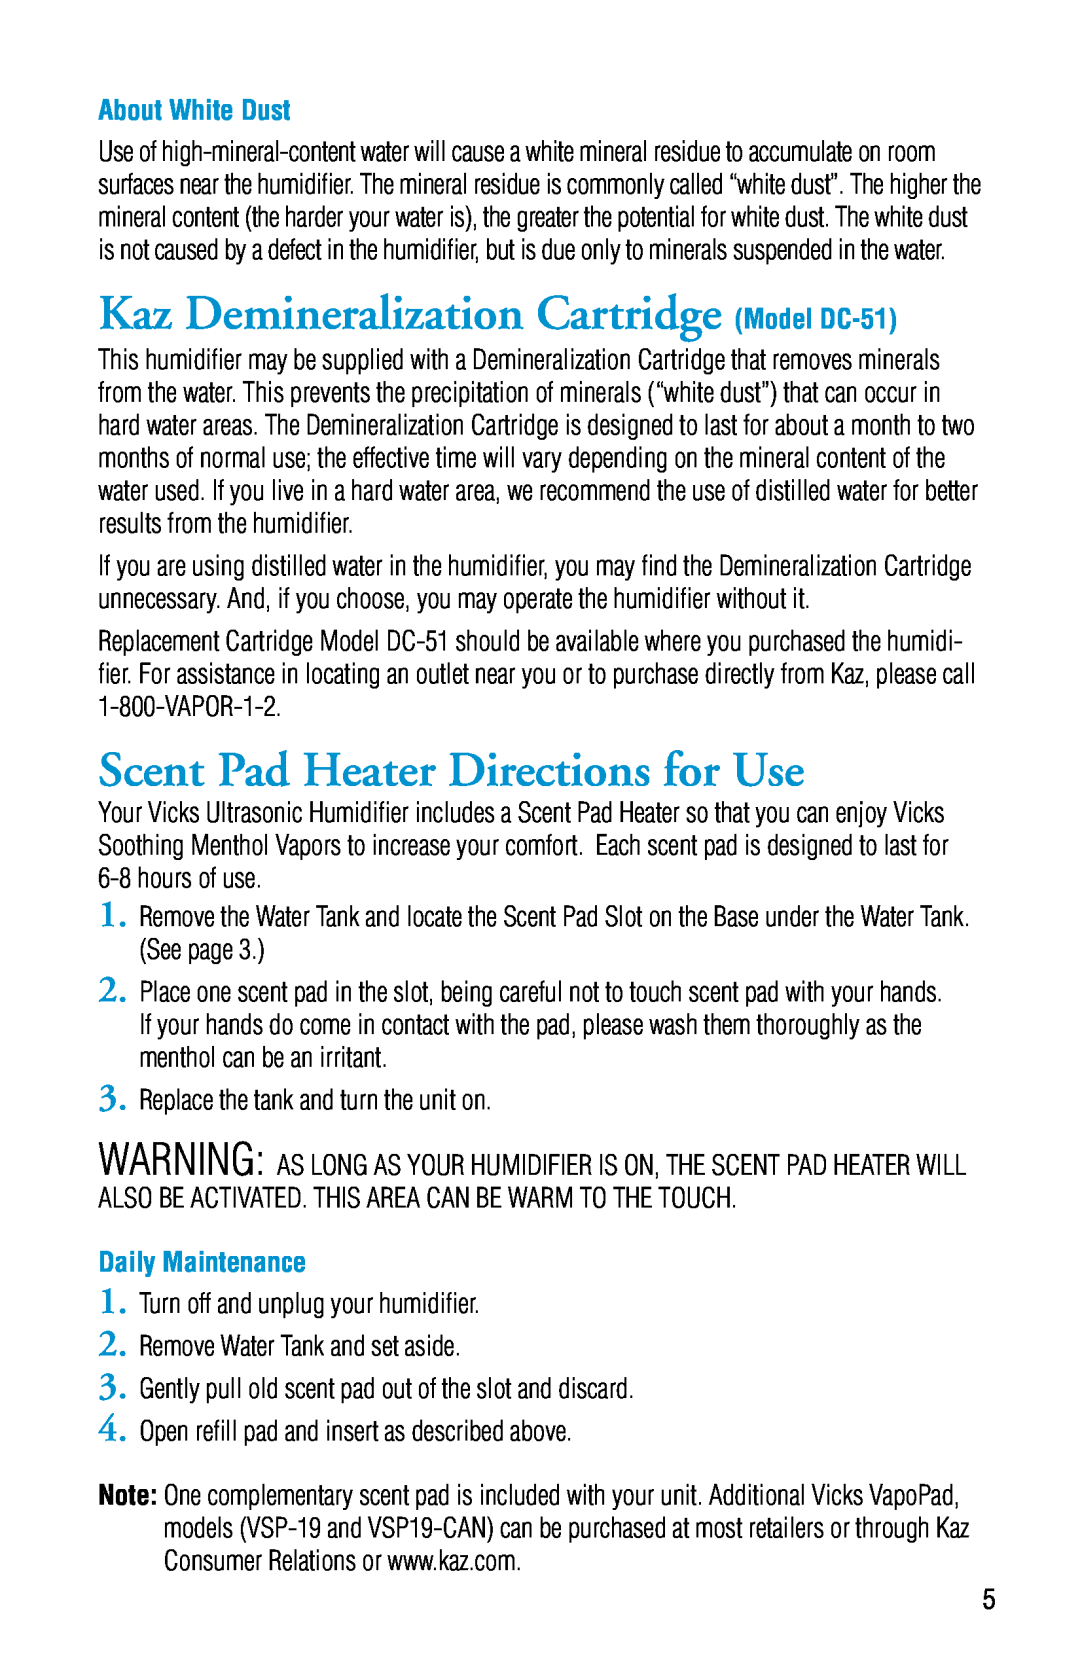 Honeywell V5100NS manual Kaz Demineralization Cartridge Model DC-51, Scent Pad Heater Directions for Use, About White Dust 